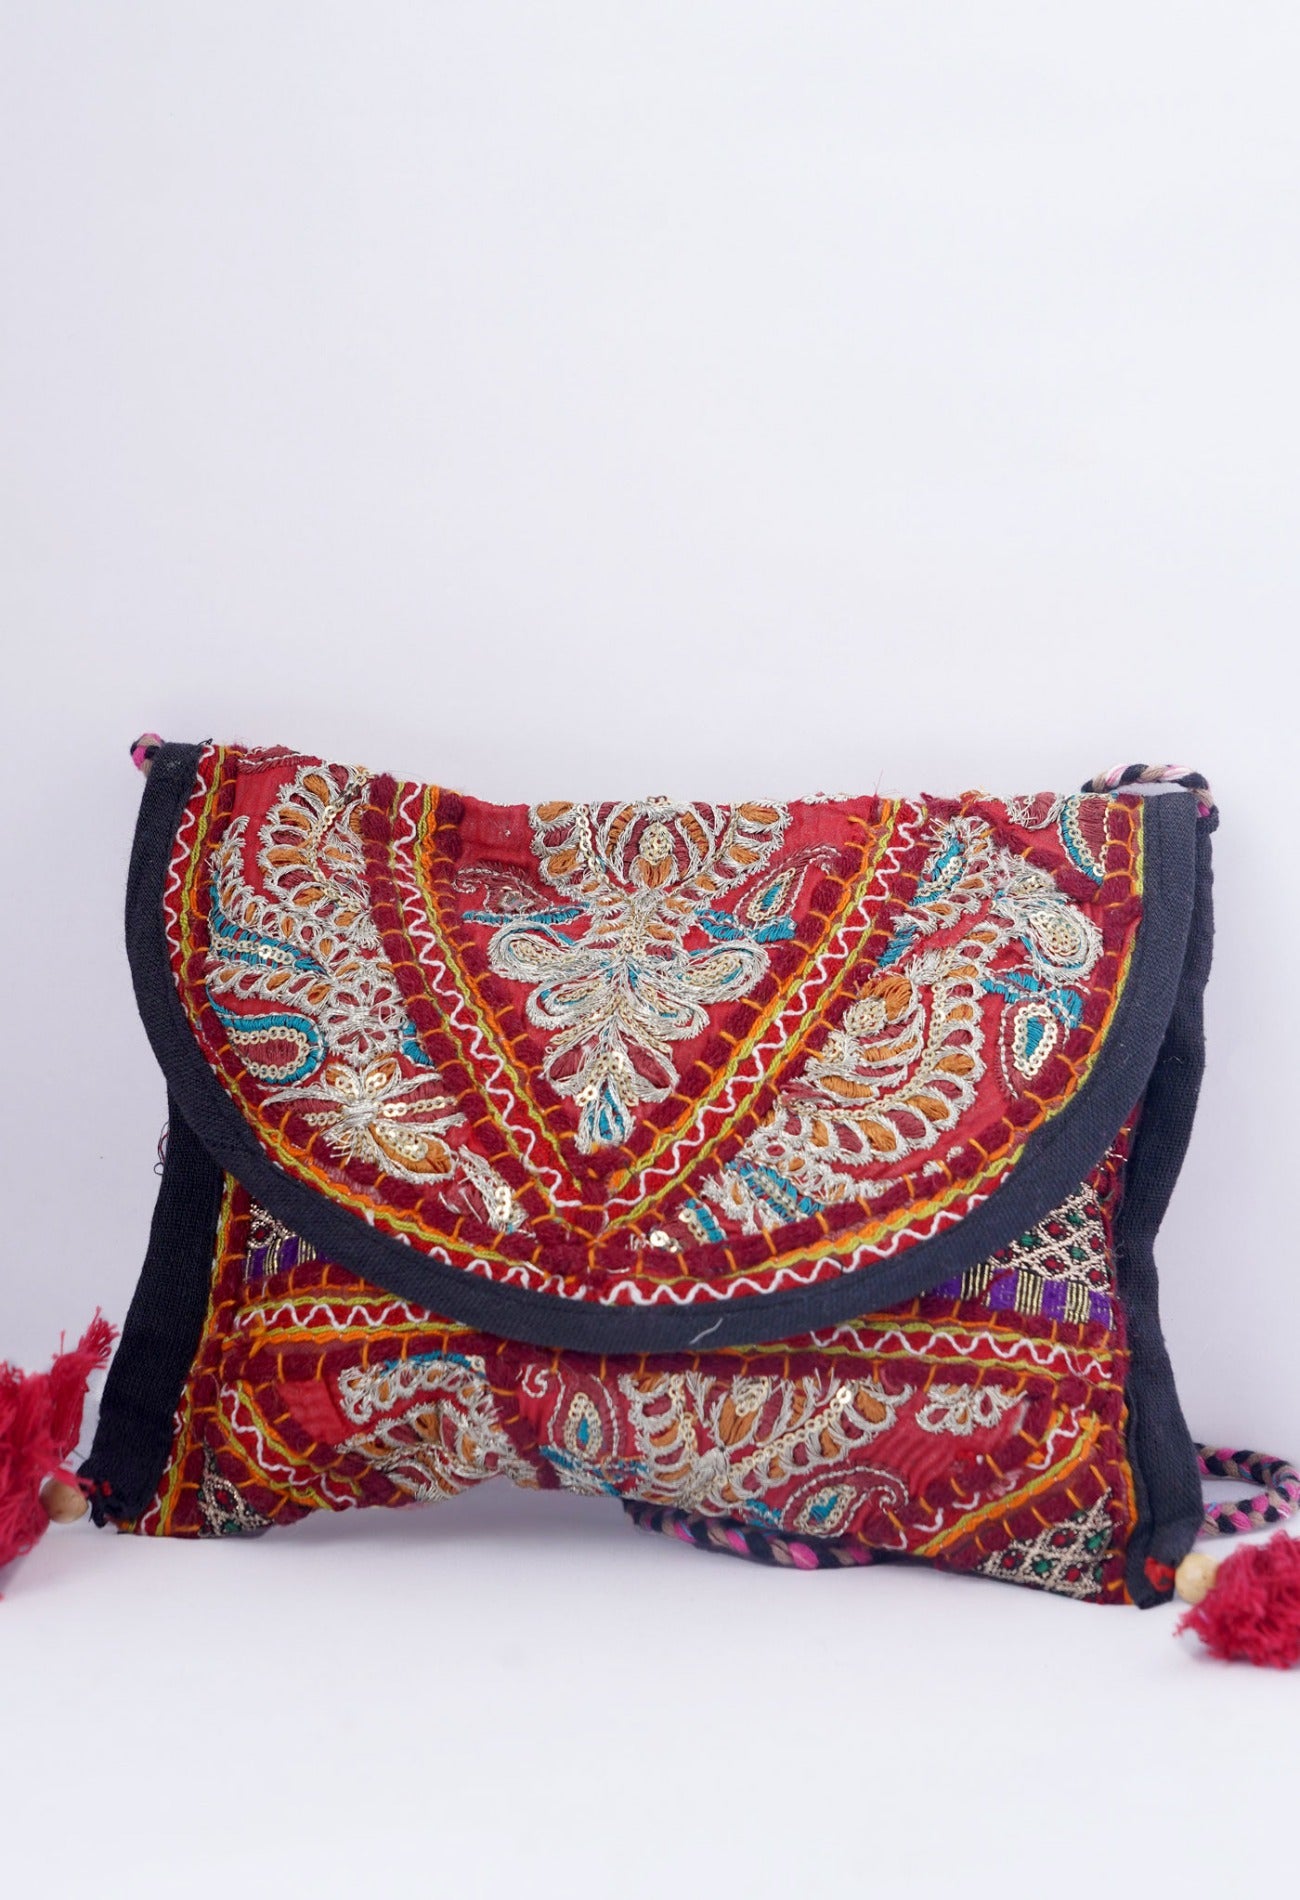 Online Shopping for Red Indian Handicraft Embroidered Hand Bag with Weaving from Rajasthan at Unnatisilks.com India_x000D_
Online Shopping for Red Indian Handicraft Embroidered Hand Bag with Weaving from Rajasthan at Unnatisilks.com India_x000D_
